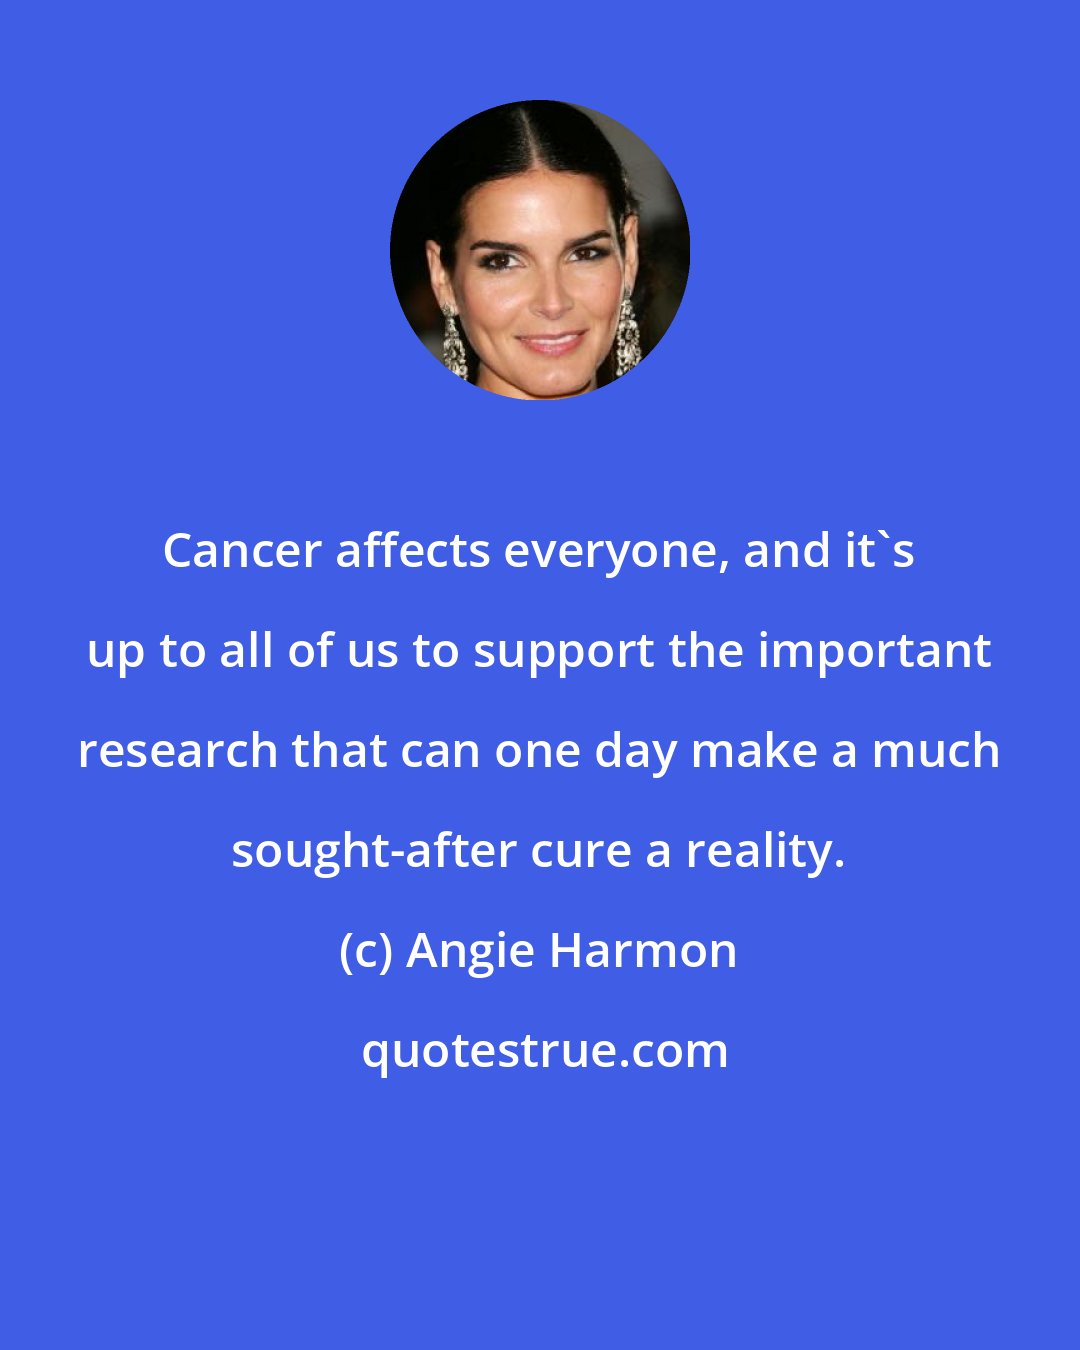 Angie Harmon: Cancer affects everyone, and it's up to all of us to support the important research that can one day make a much sought-after cure a reality.